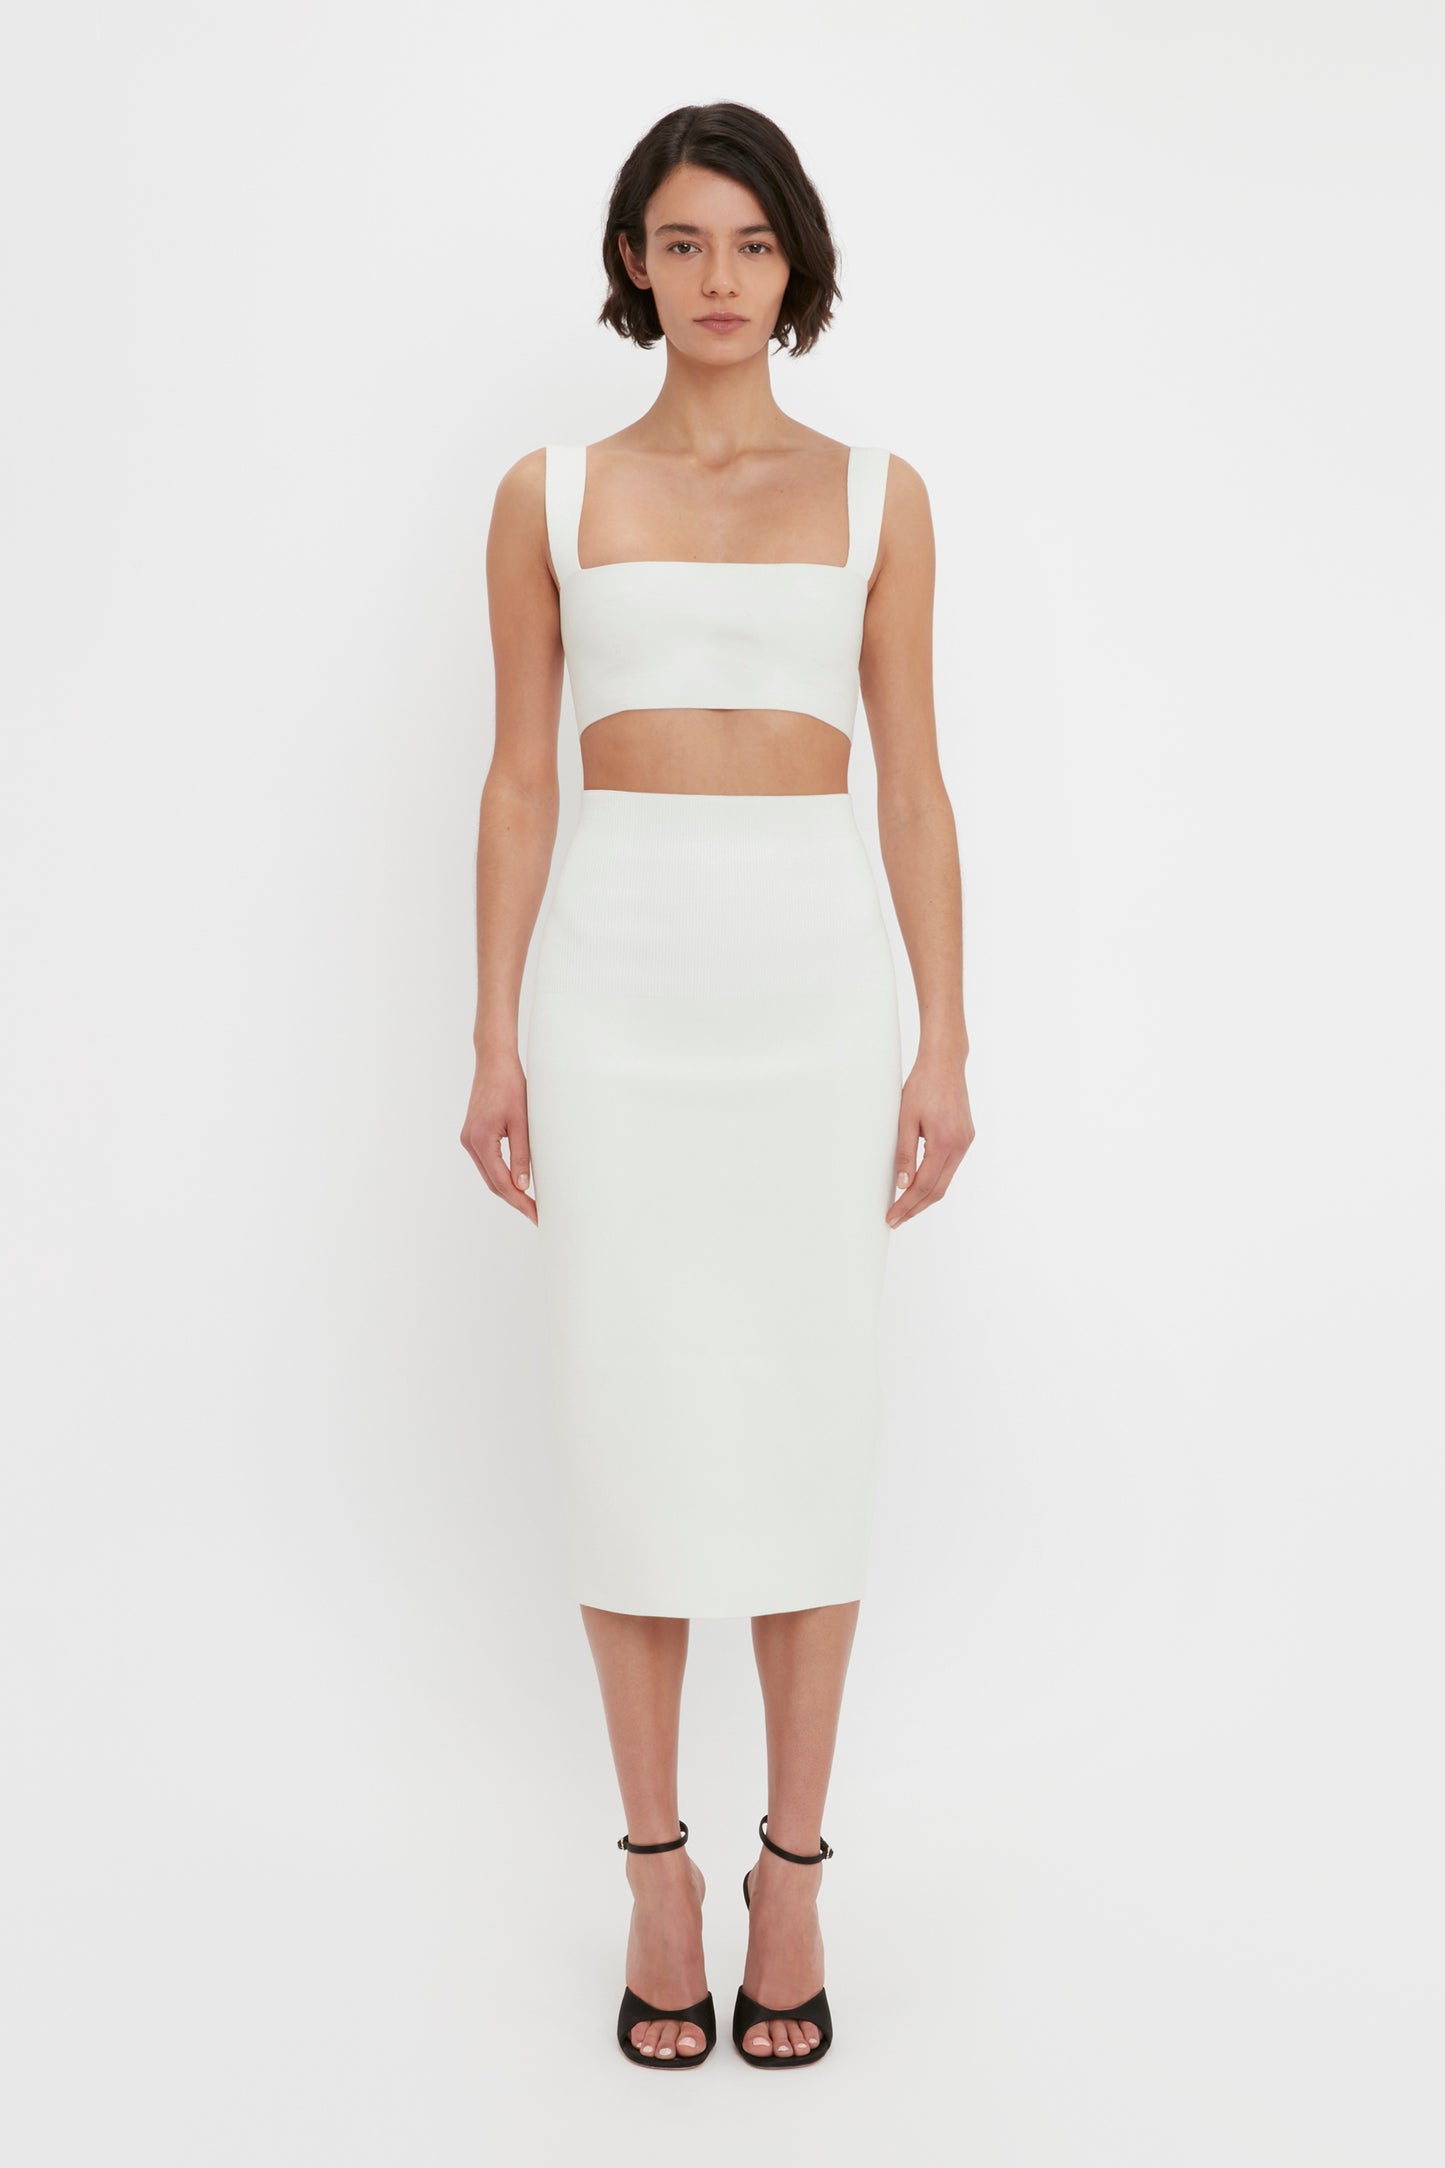 A woman wearing a white strap VB Body Strap Bandeau Top in White and matching VB Body Fitted Midi Skirt stands facing forward against a plain white background.